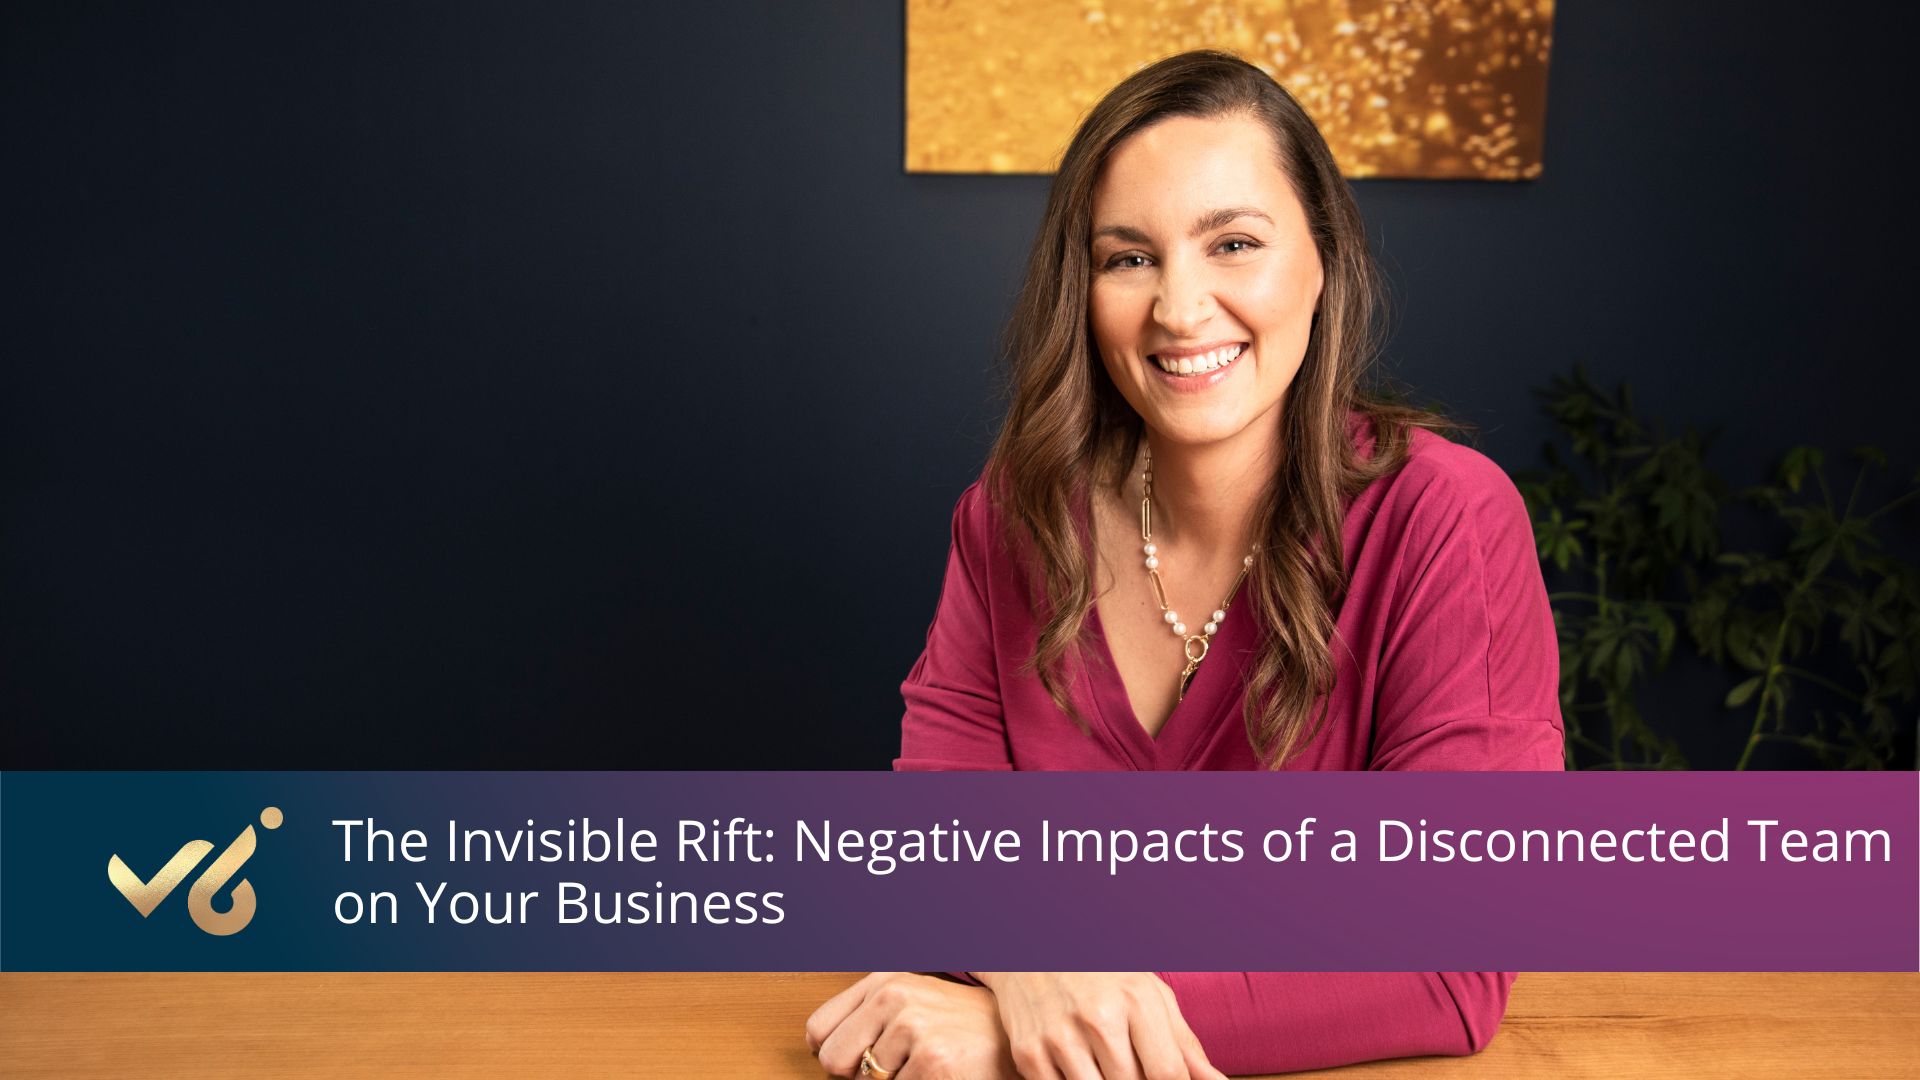 The Invisible Rift: Negative Impacts of a Disconnected Team on Your Business 